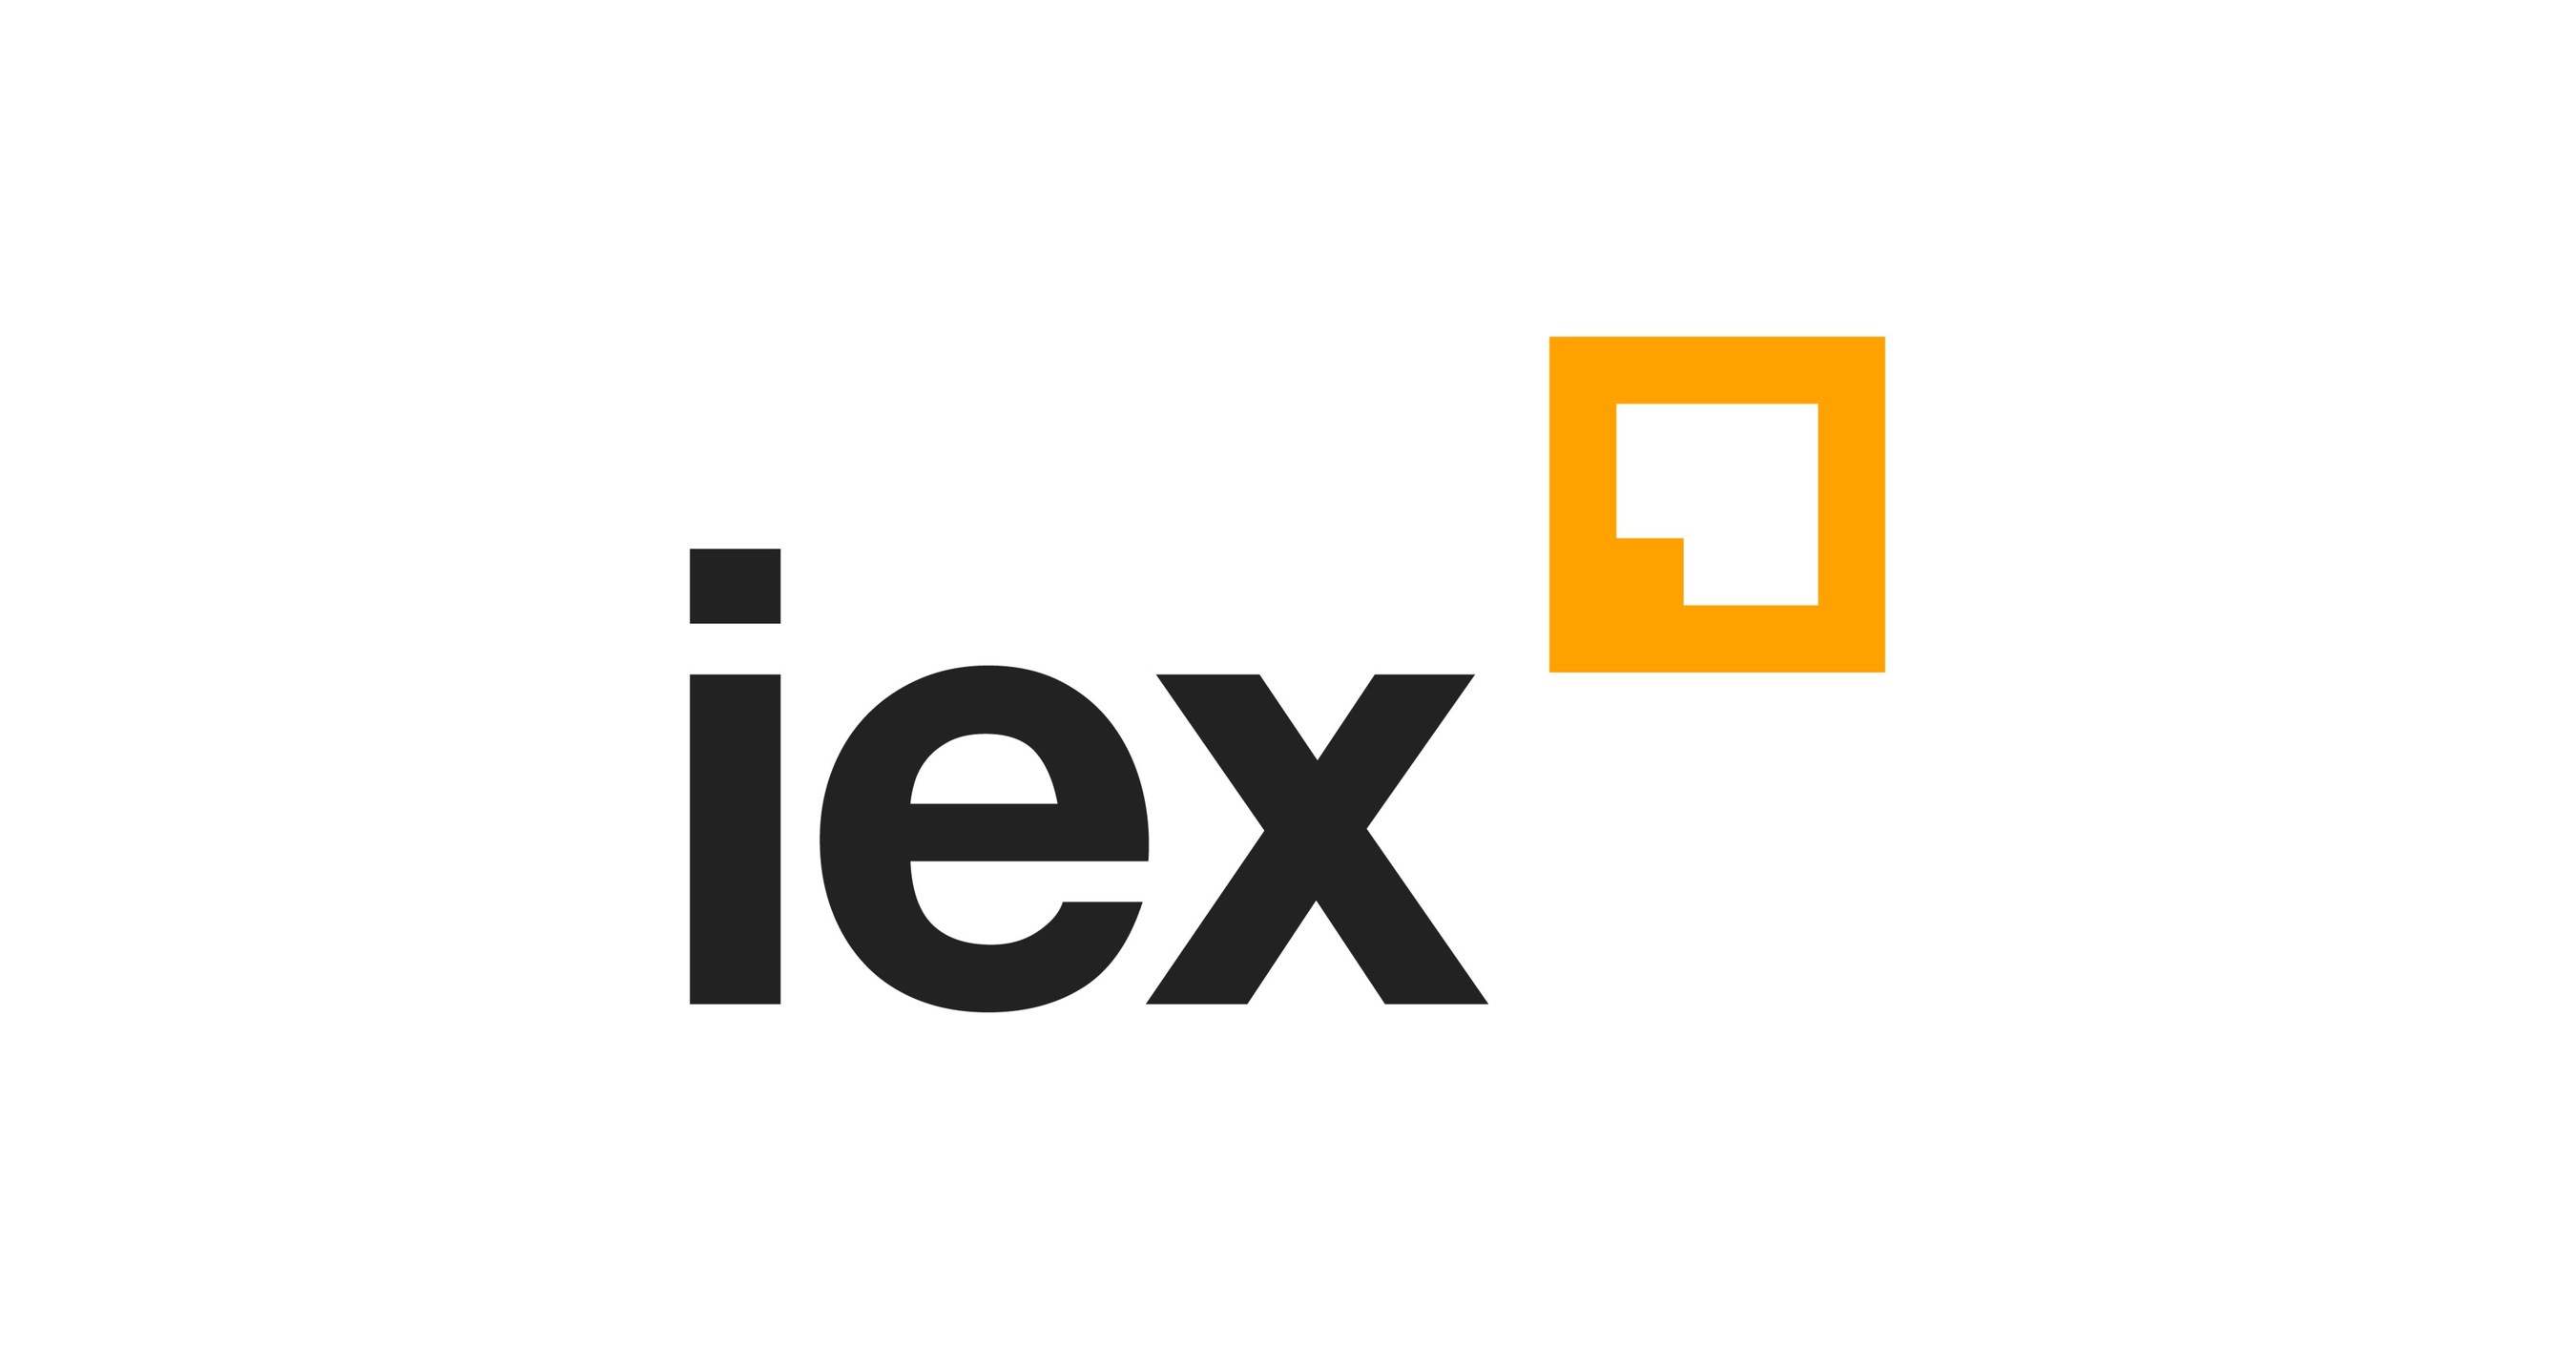 FTX US to invest in IEX stock exchange to launch digital securities